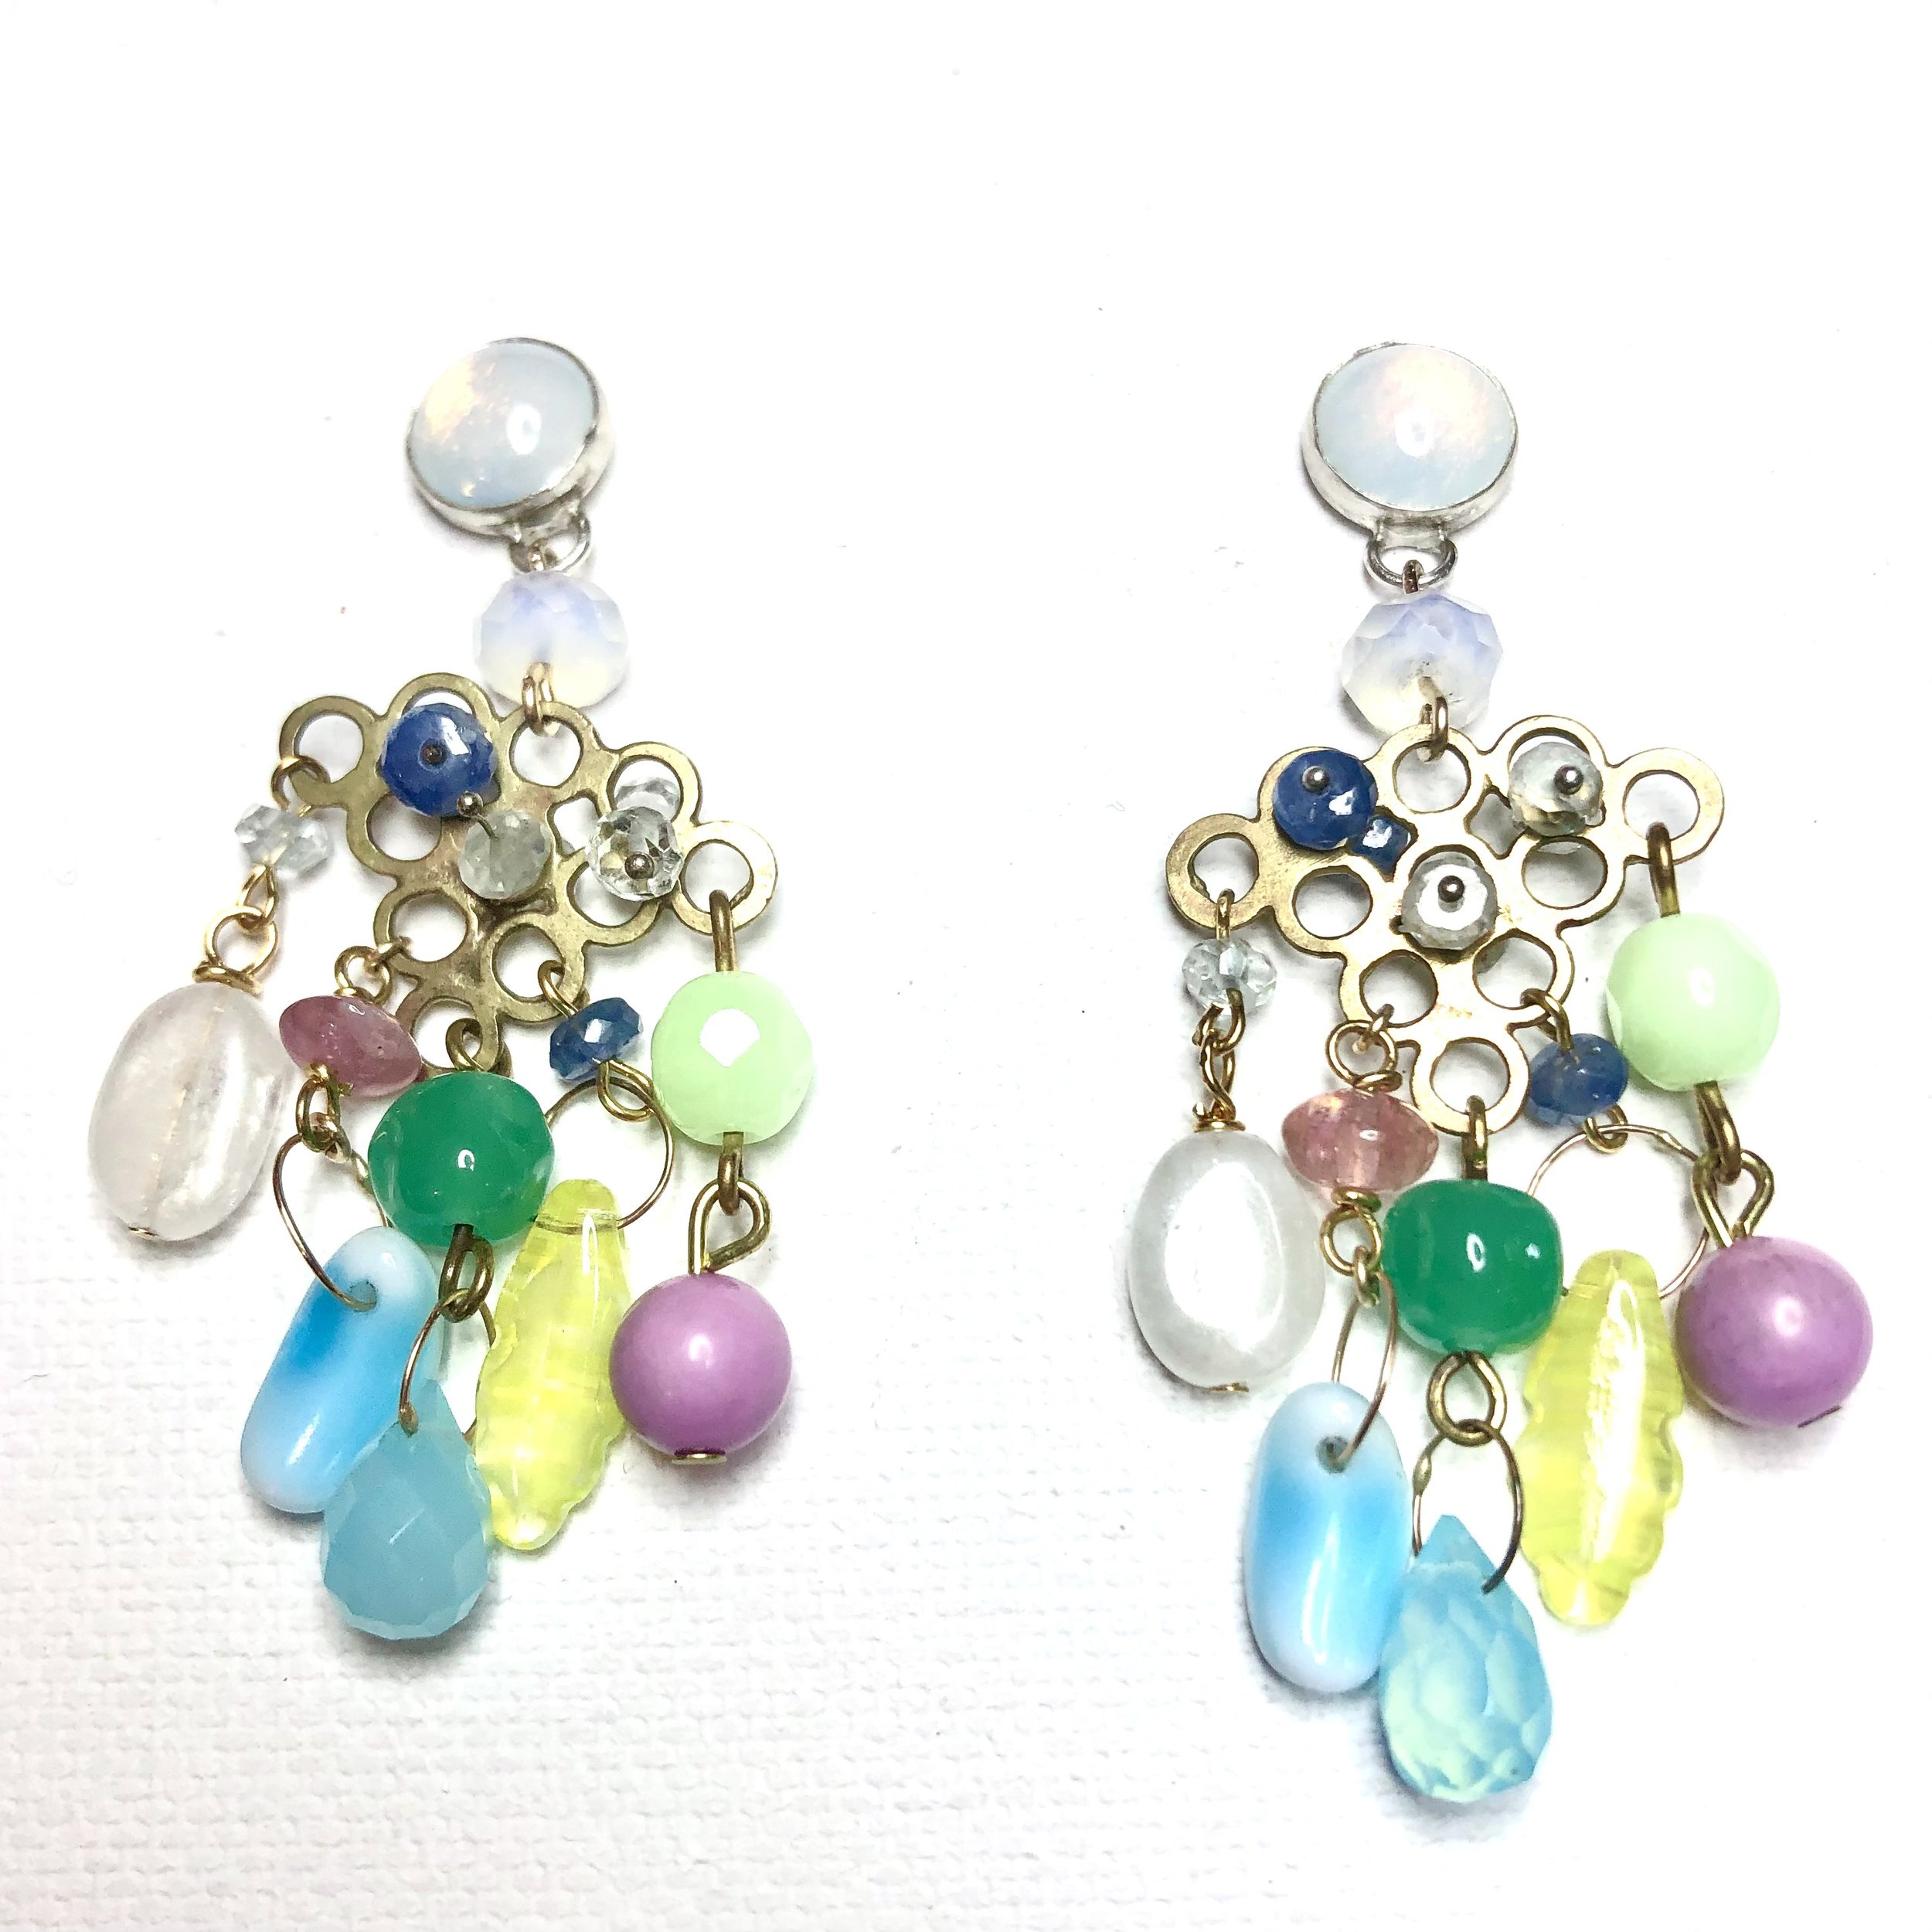  Pale rainbow chandelier cloud earrings featuring a collage of vintage glass stone, sapphire, rhodonite, German glass chip beads, chalcedony, moonstone, sterling silver &amp; brass 